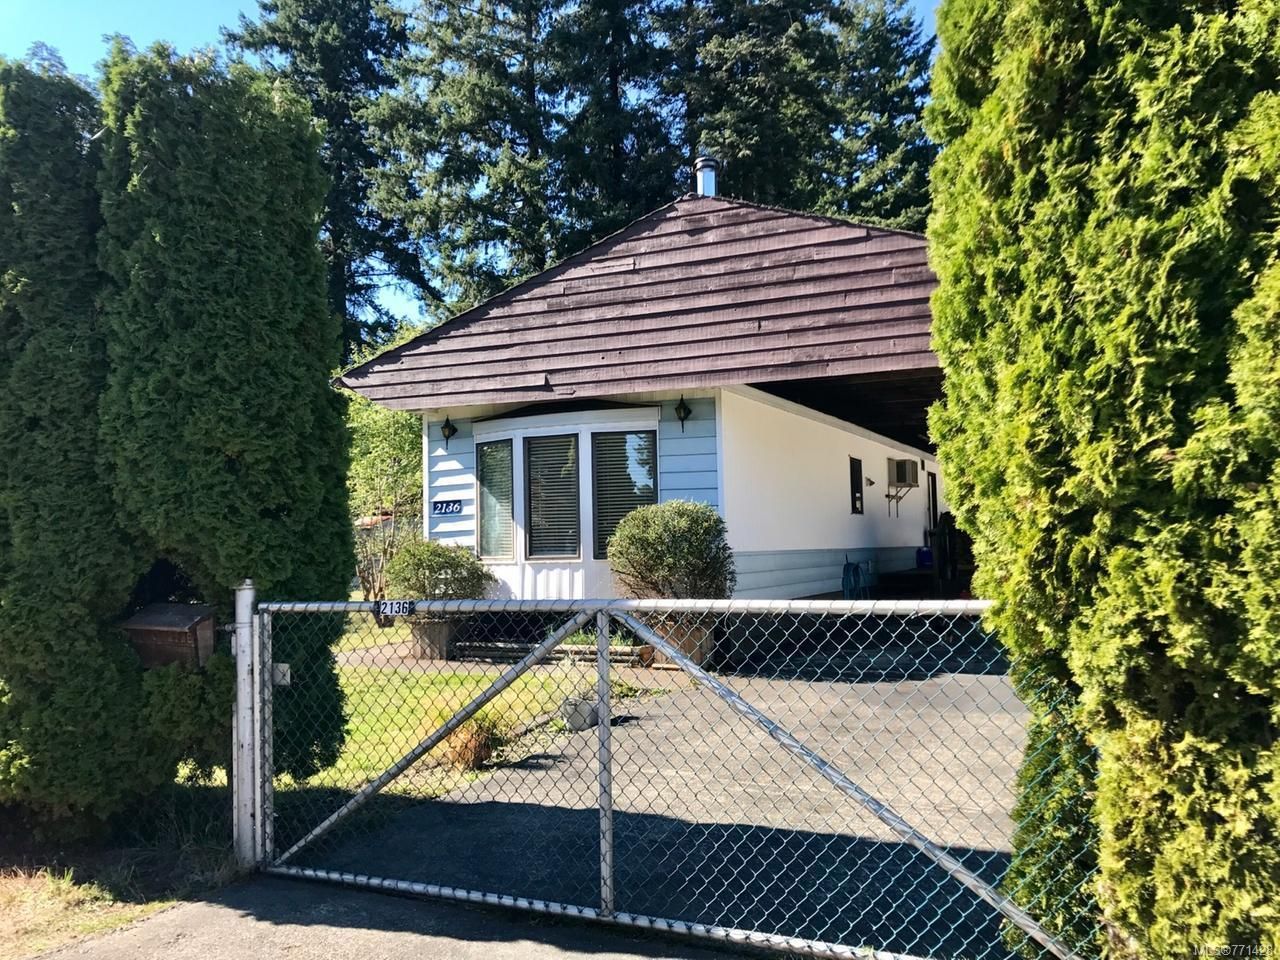 Main Photo: 2136 EBERT ROAD in CAMPBELL RIVER: CR Campbell River North Manufactured Home for sale (Campbell River)  : MLS®# 771428